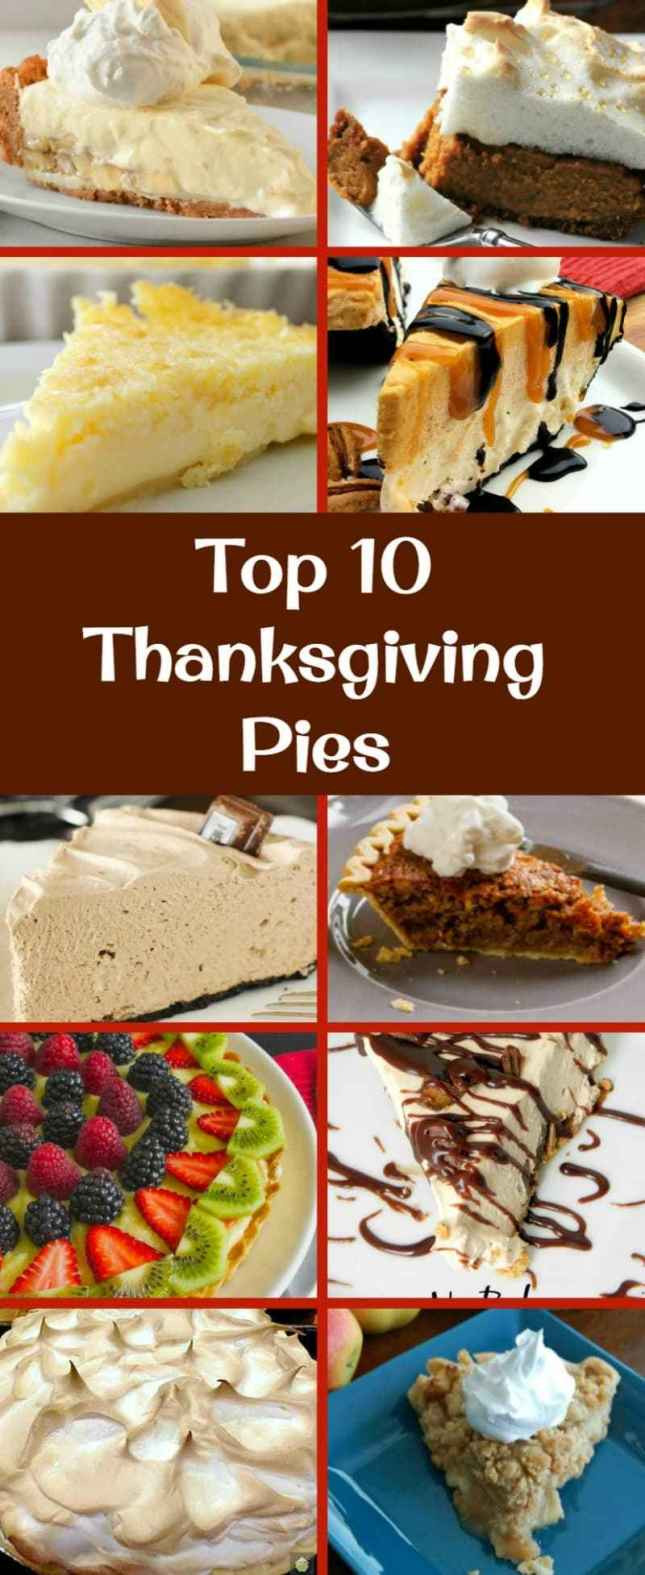 Best Pies For Thanksgiving
 The BEST Top 10 Thanksgiving Pies – Lovefoo s